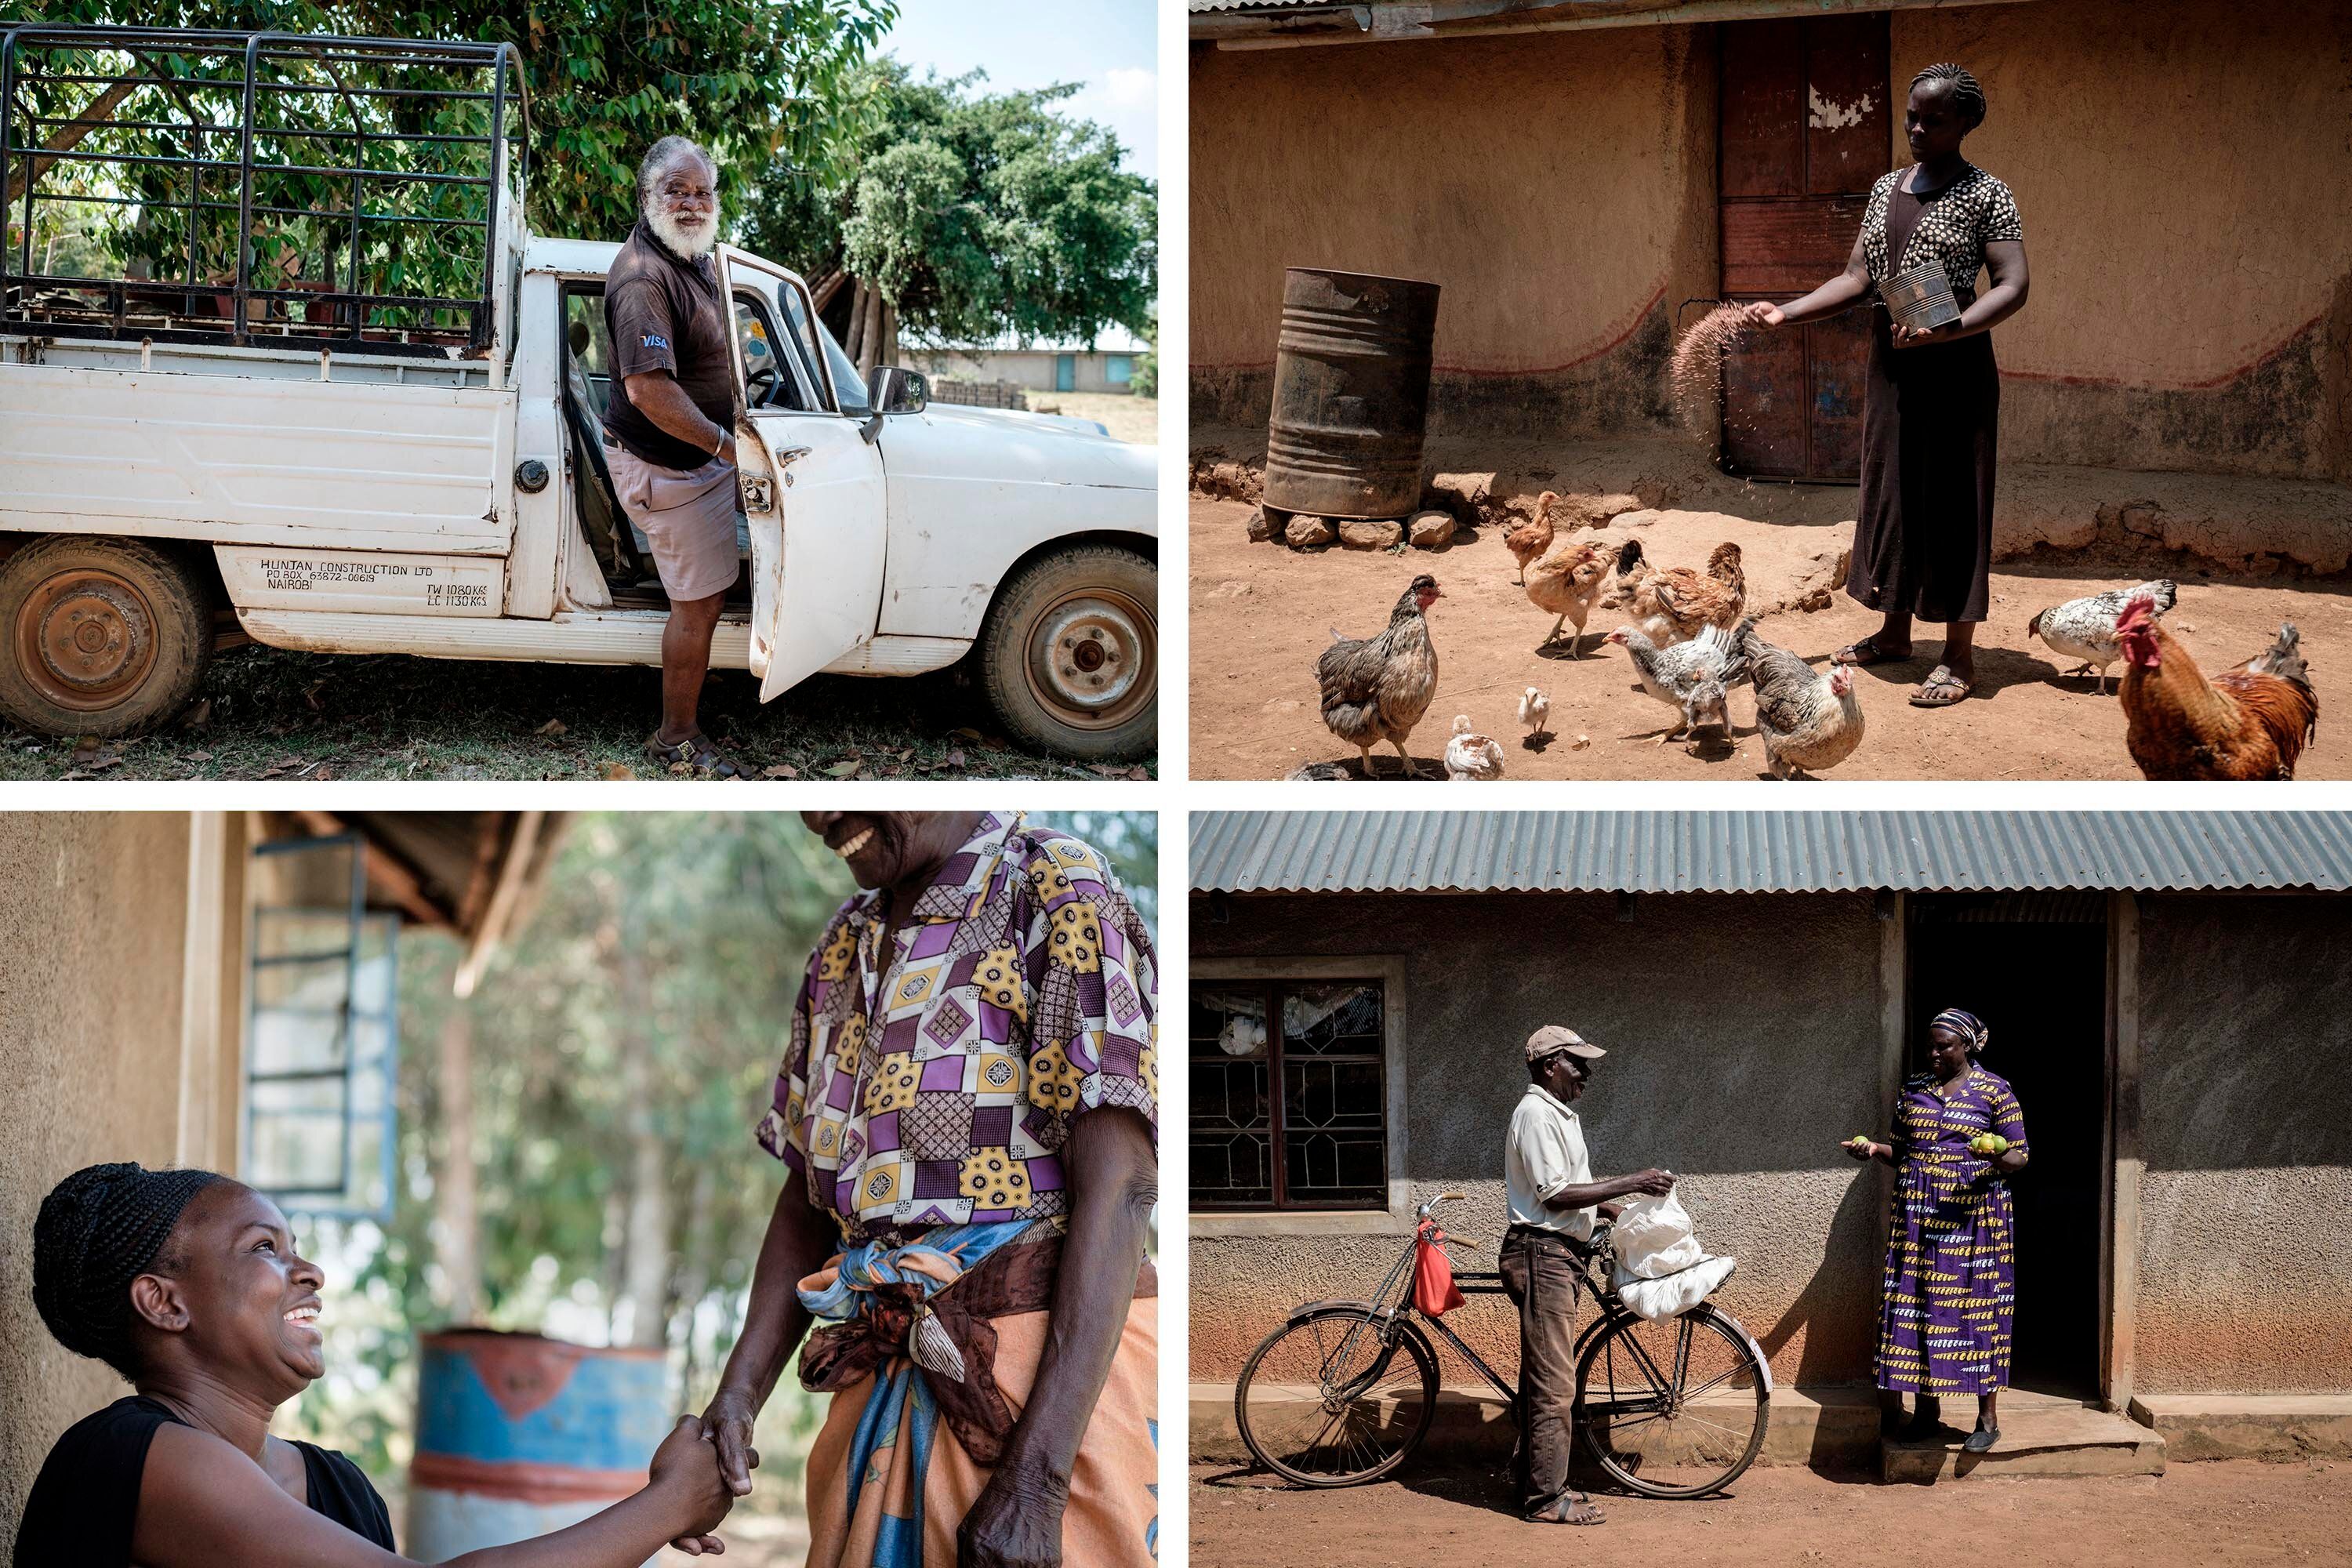 Top left: Samson, 72, gets 2,250 shillings a month ($21) as a recipient of the UBI program, which he uses for his fish farm in the Bondo region of western Kenya. Top right: Monica, 30, uses the basic income to support the poultry farm she runs with her husband. Bottom left: Caroline Teti, of the nonprofit GiveDirectly, shakes hands with a basic income recipient. Bottom right: Grace, who is 65 and retired, uses the money for treatment of her swollen leg and for buying food. Credit: Yasuyoshi Chiba/AFP/Getty Images